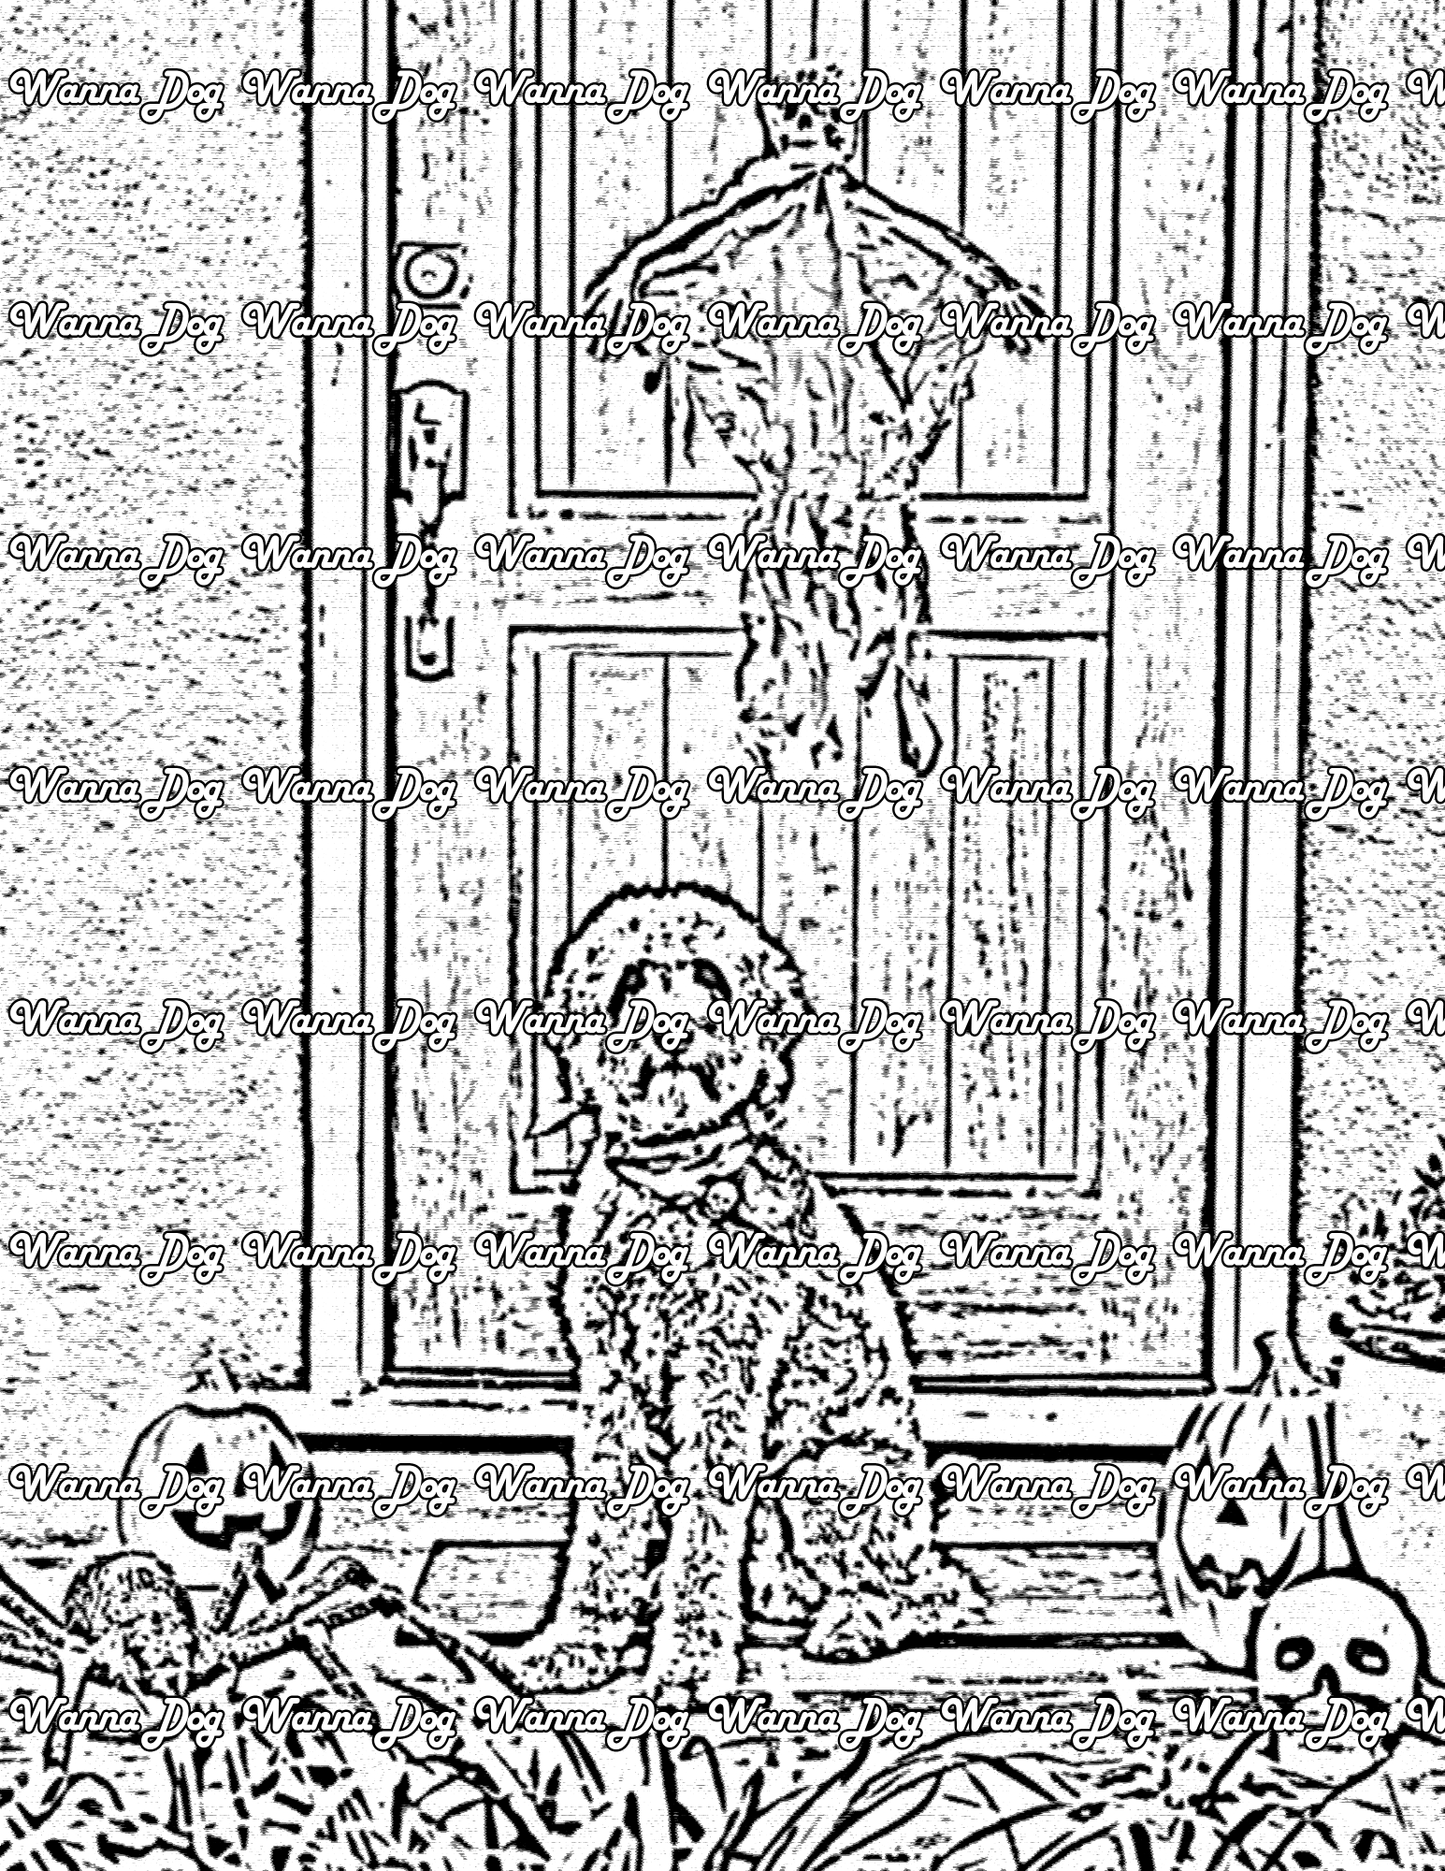 Goldendoodle Coloring Page of a Goldendoodle sitting in front of Halloween decorations